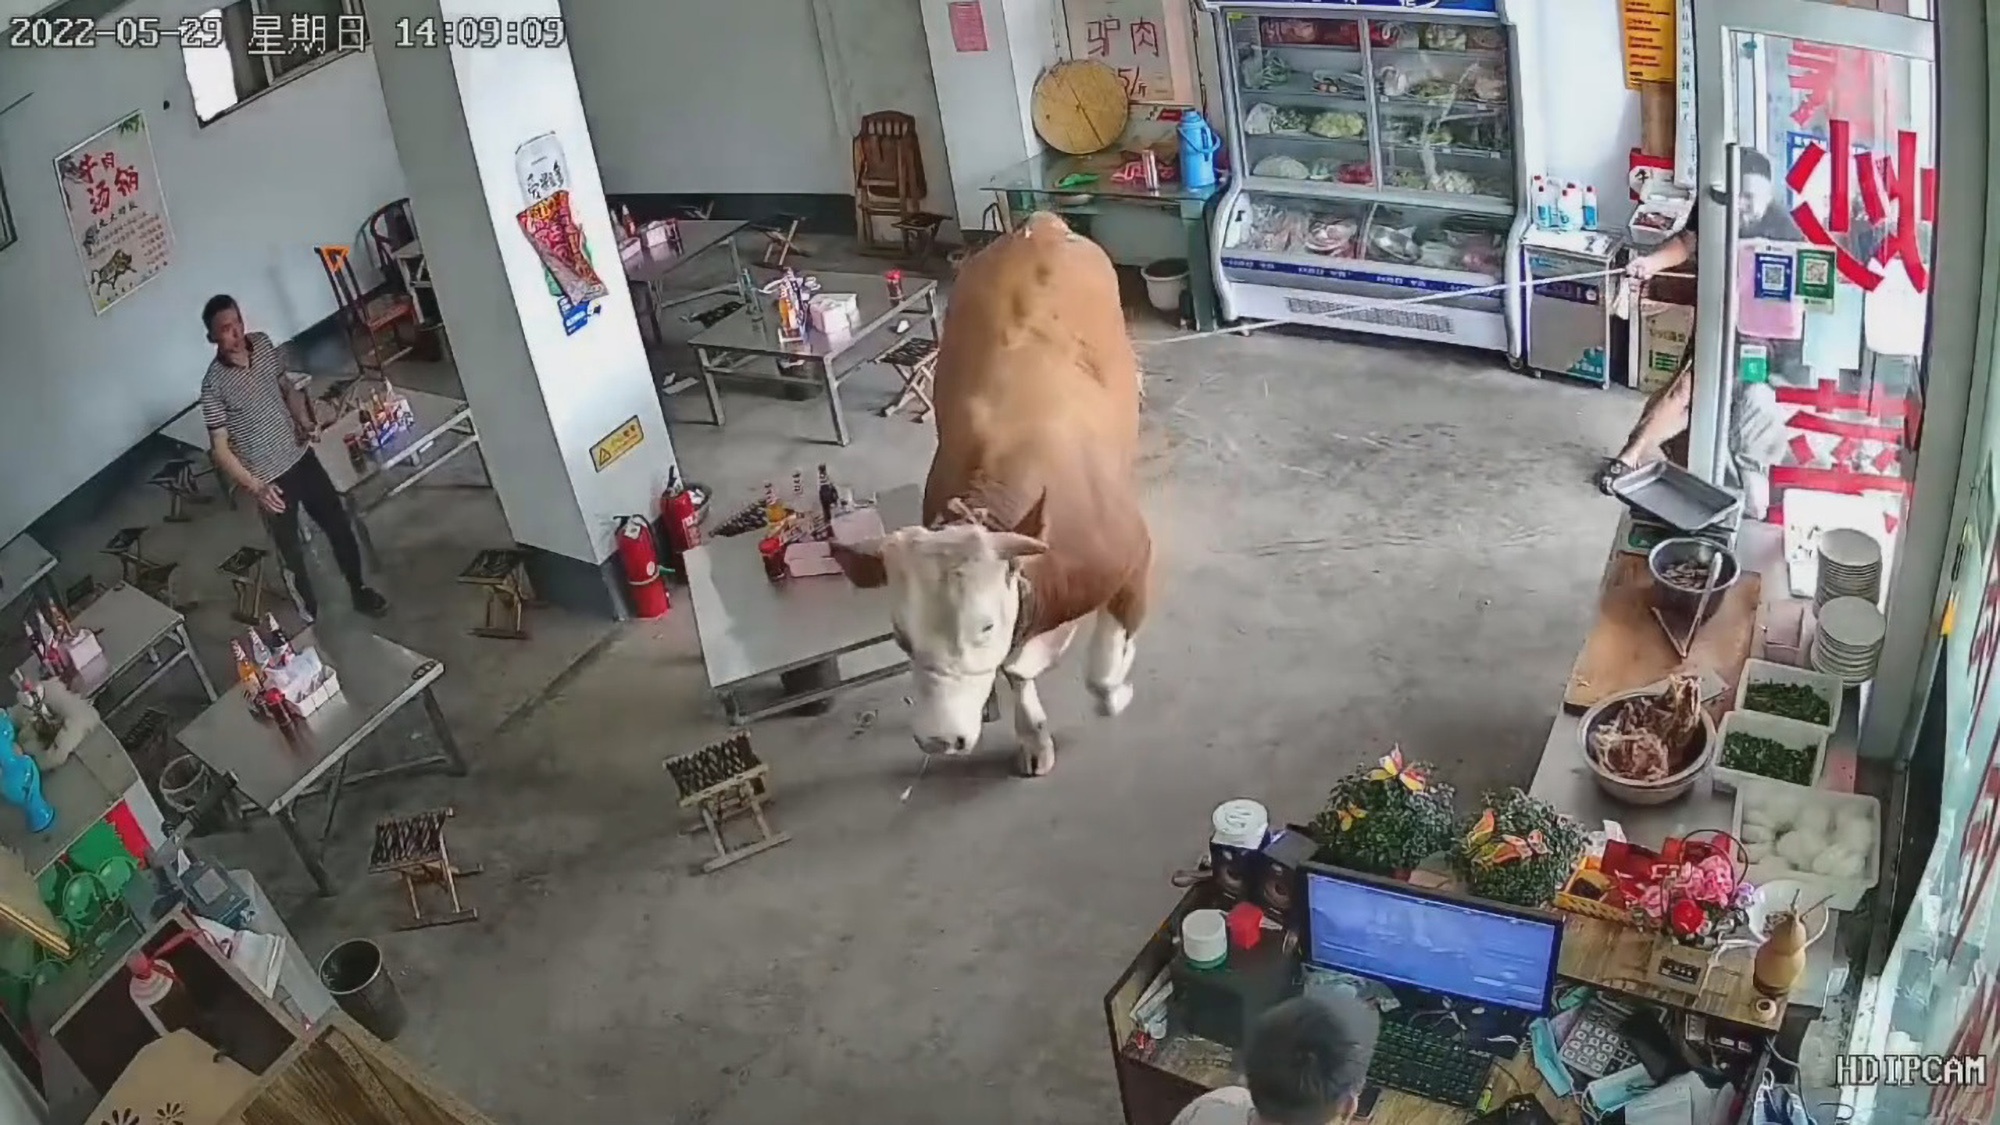 Read more about the article MOO-VE IT! Huge Bull Goes On Rampage On Way To Slaughterhouse